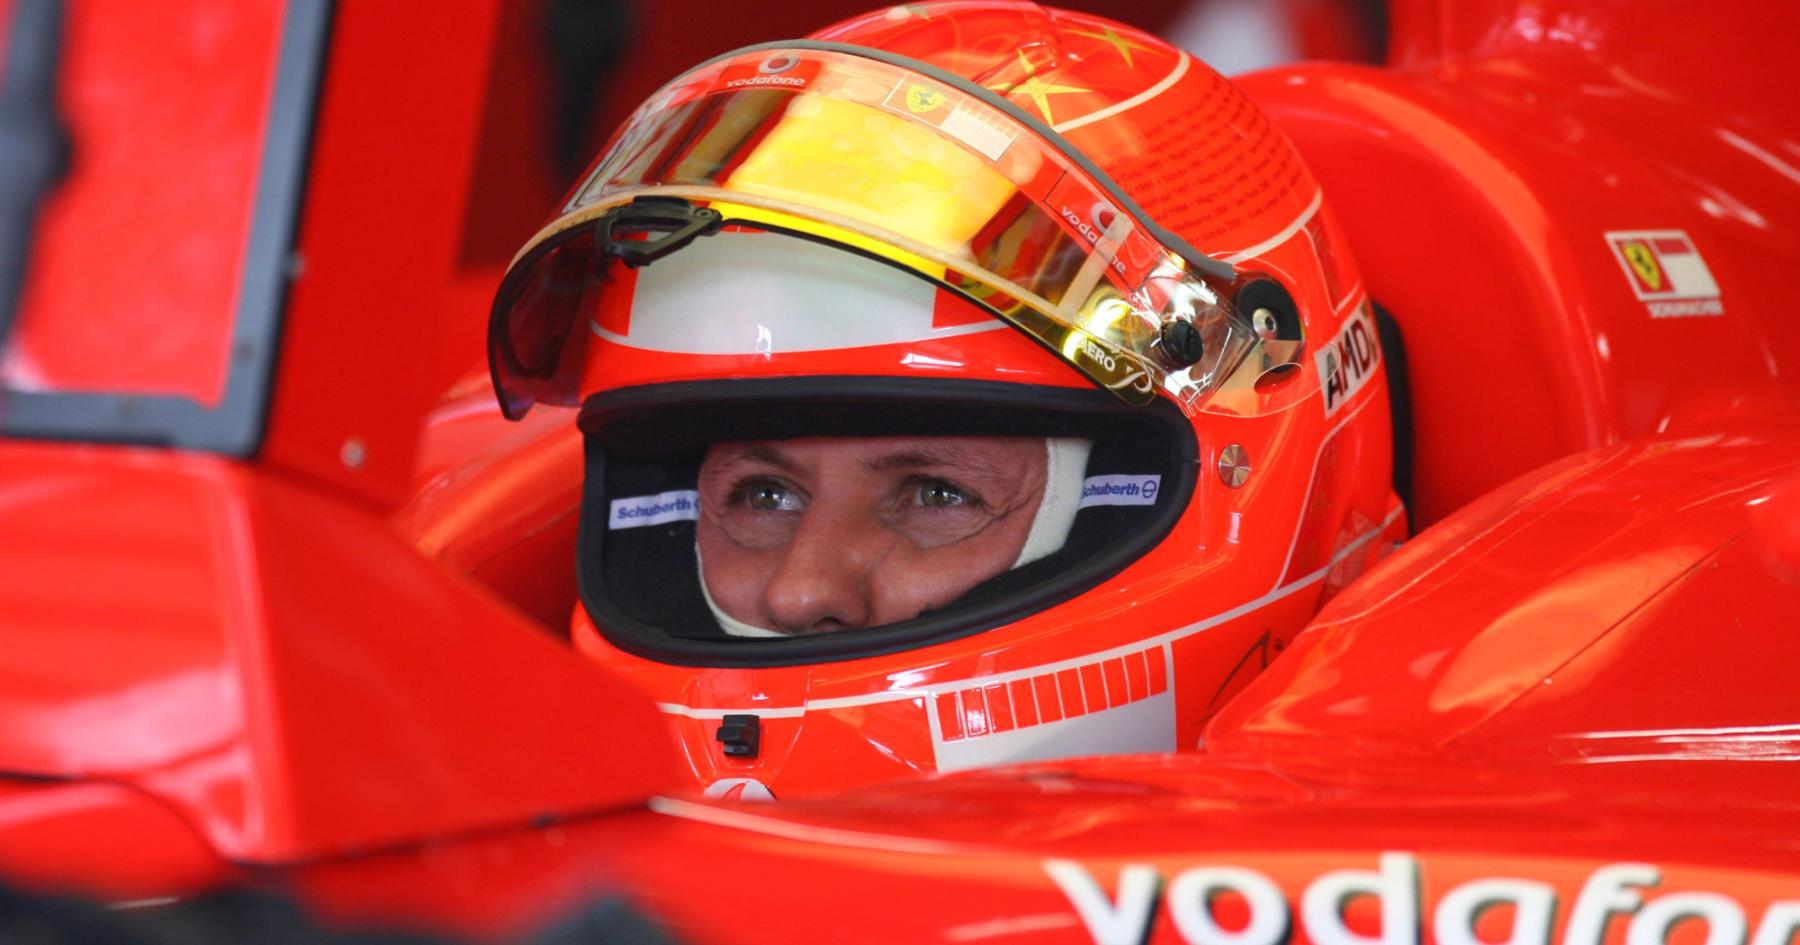 Two men arrested after blackmailing Schumacher family - report